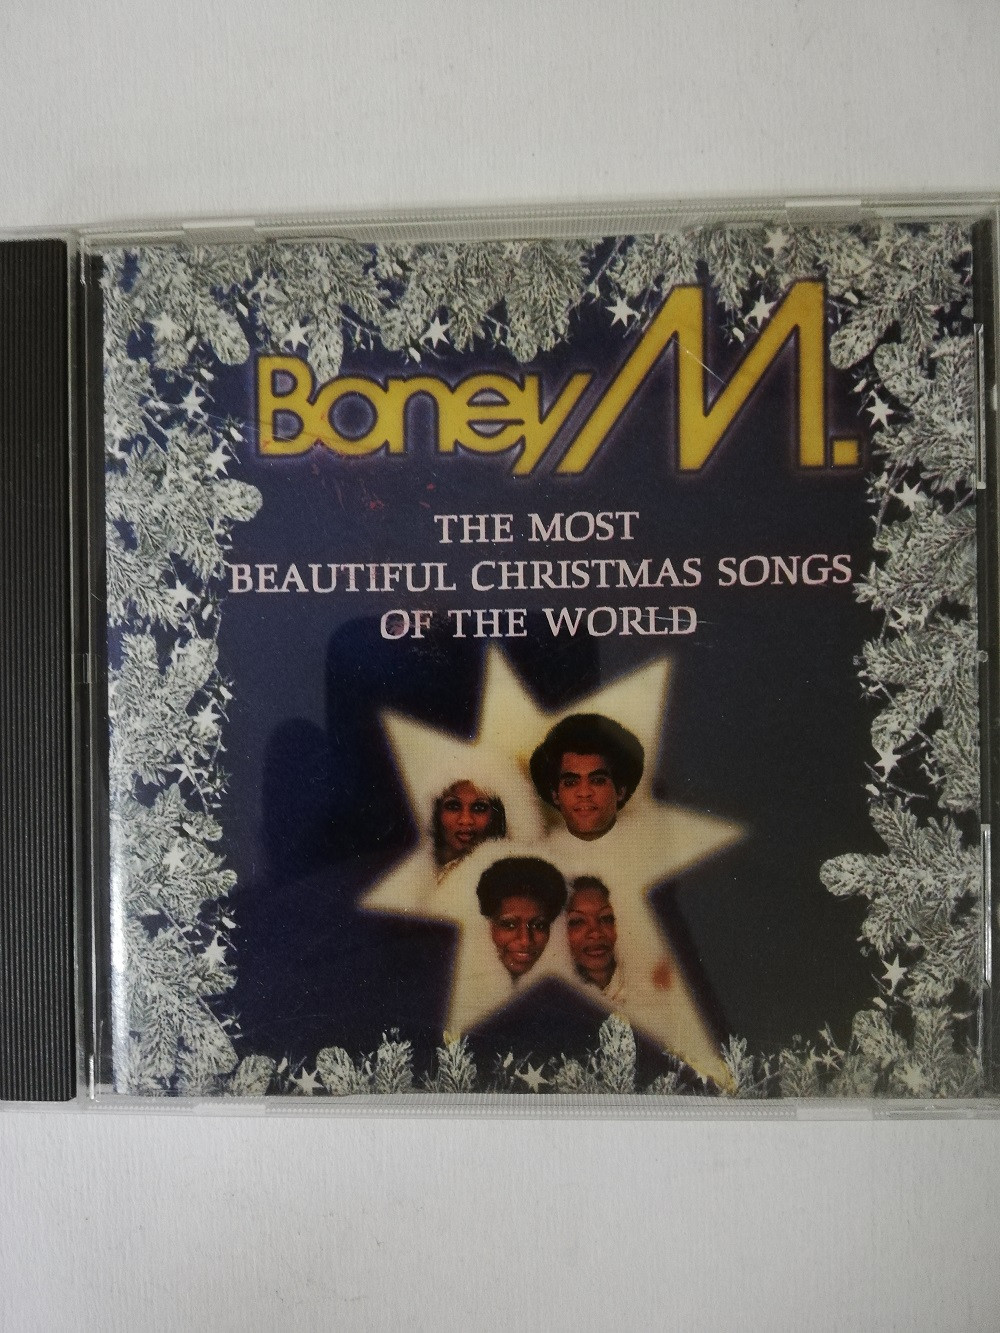 Imagen CD BONEY M - THE MOST BEAUTIFUL CHRISTMAS SONGS OF THE WORLD